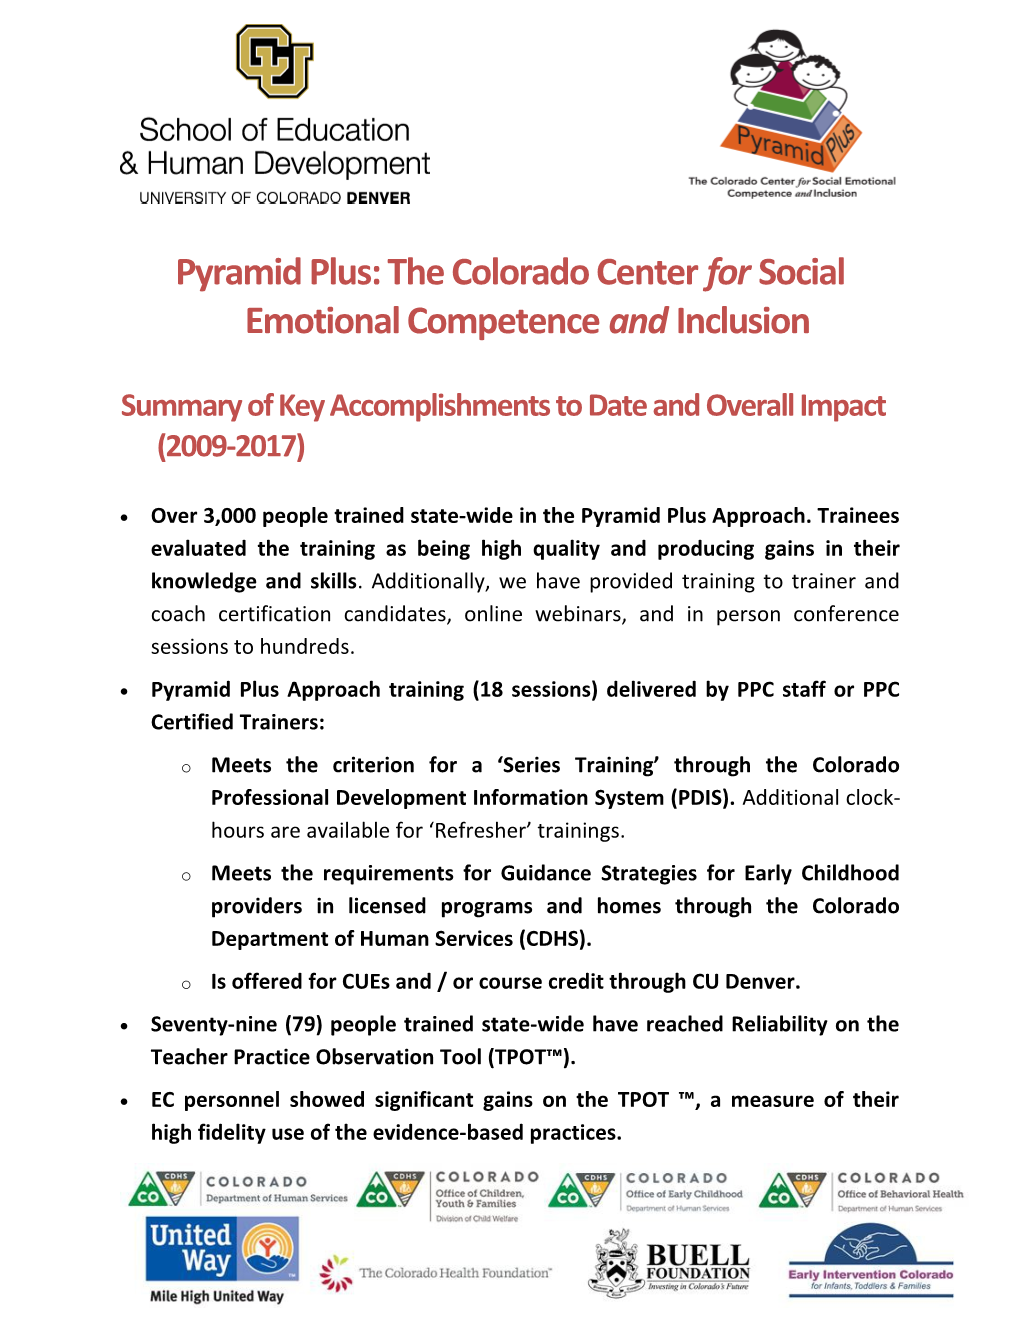 Pyramid Plus: the Colorado Center for Social Emotional Competence and Inclusion